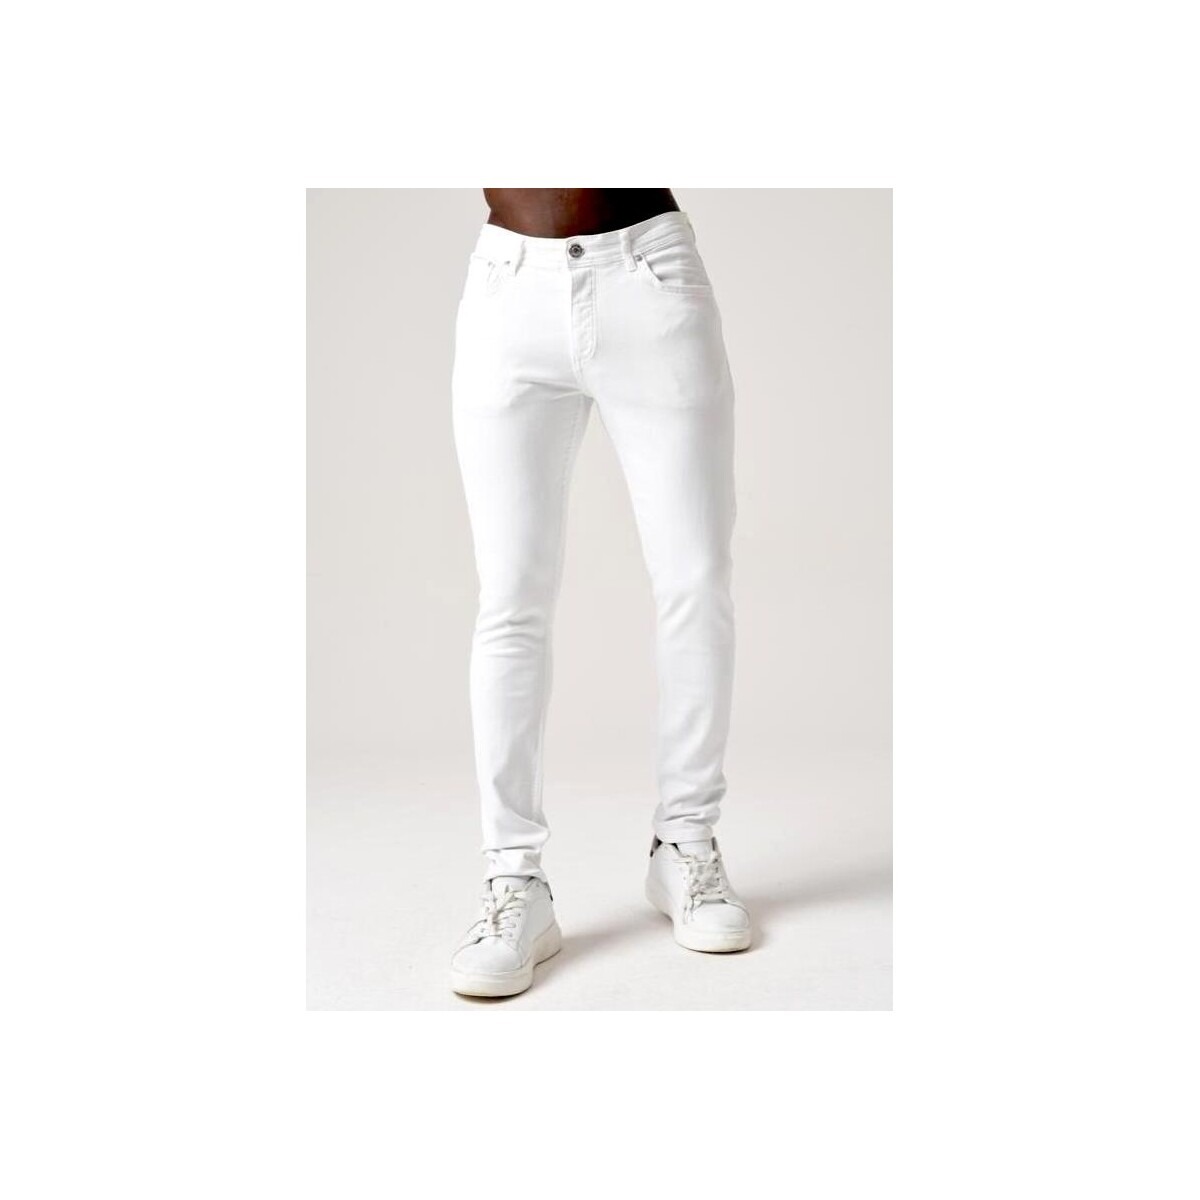 True Rise White Skinny Jeans for Men from Spartoo GOOFASH